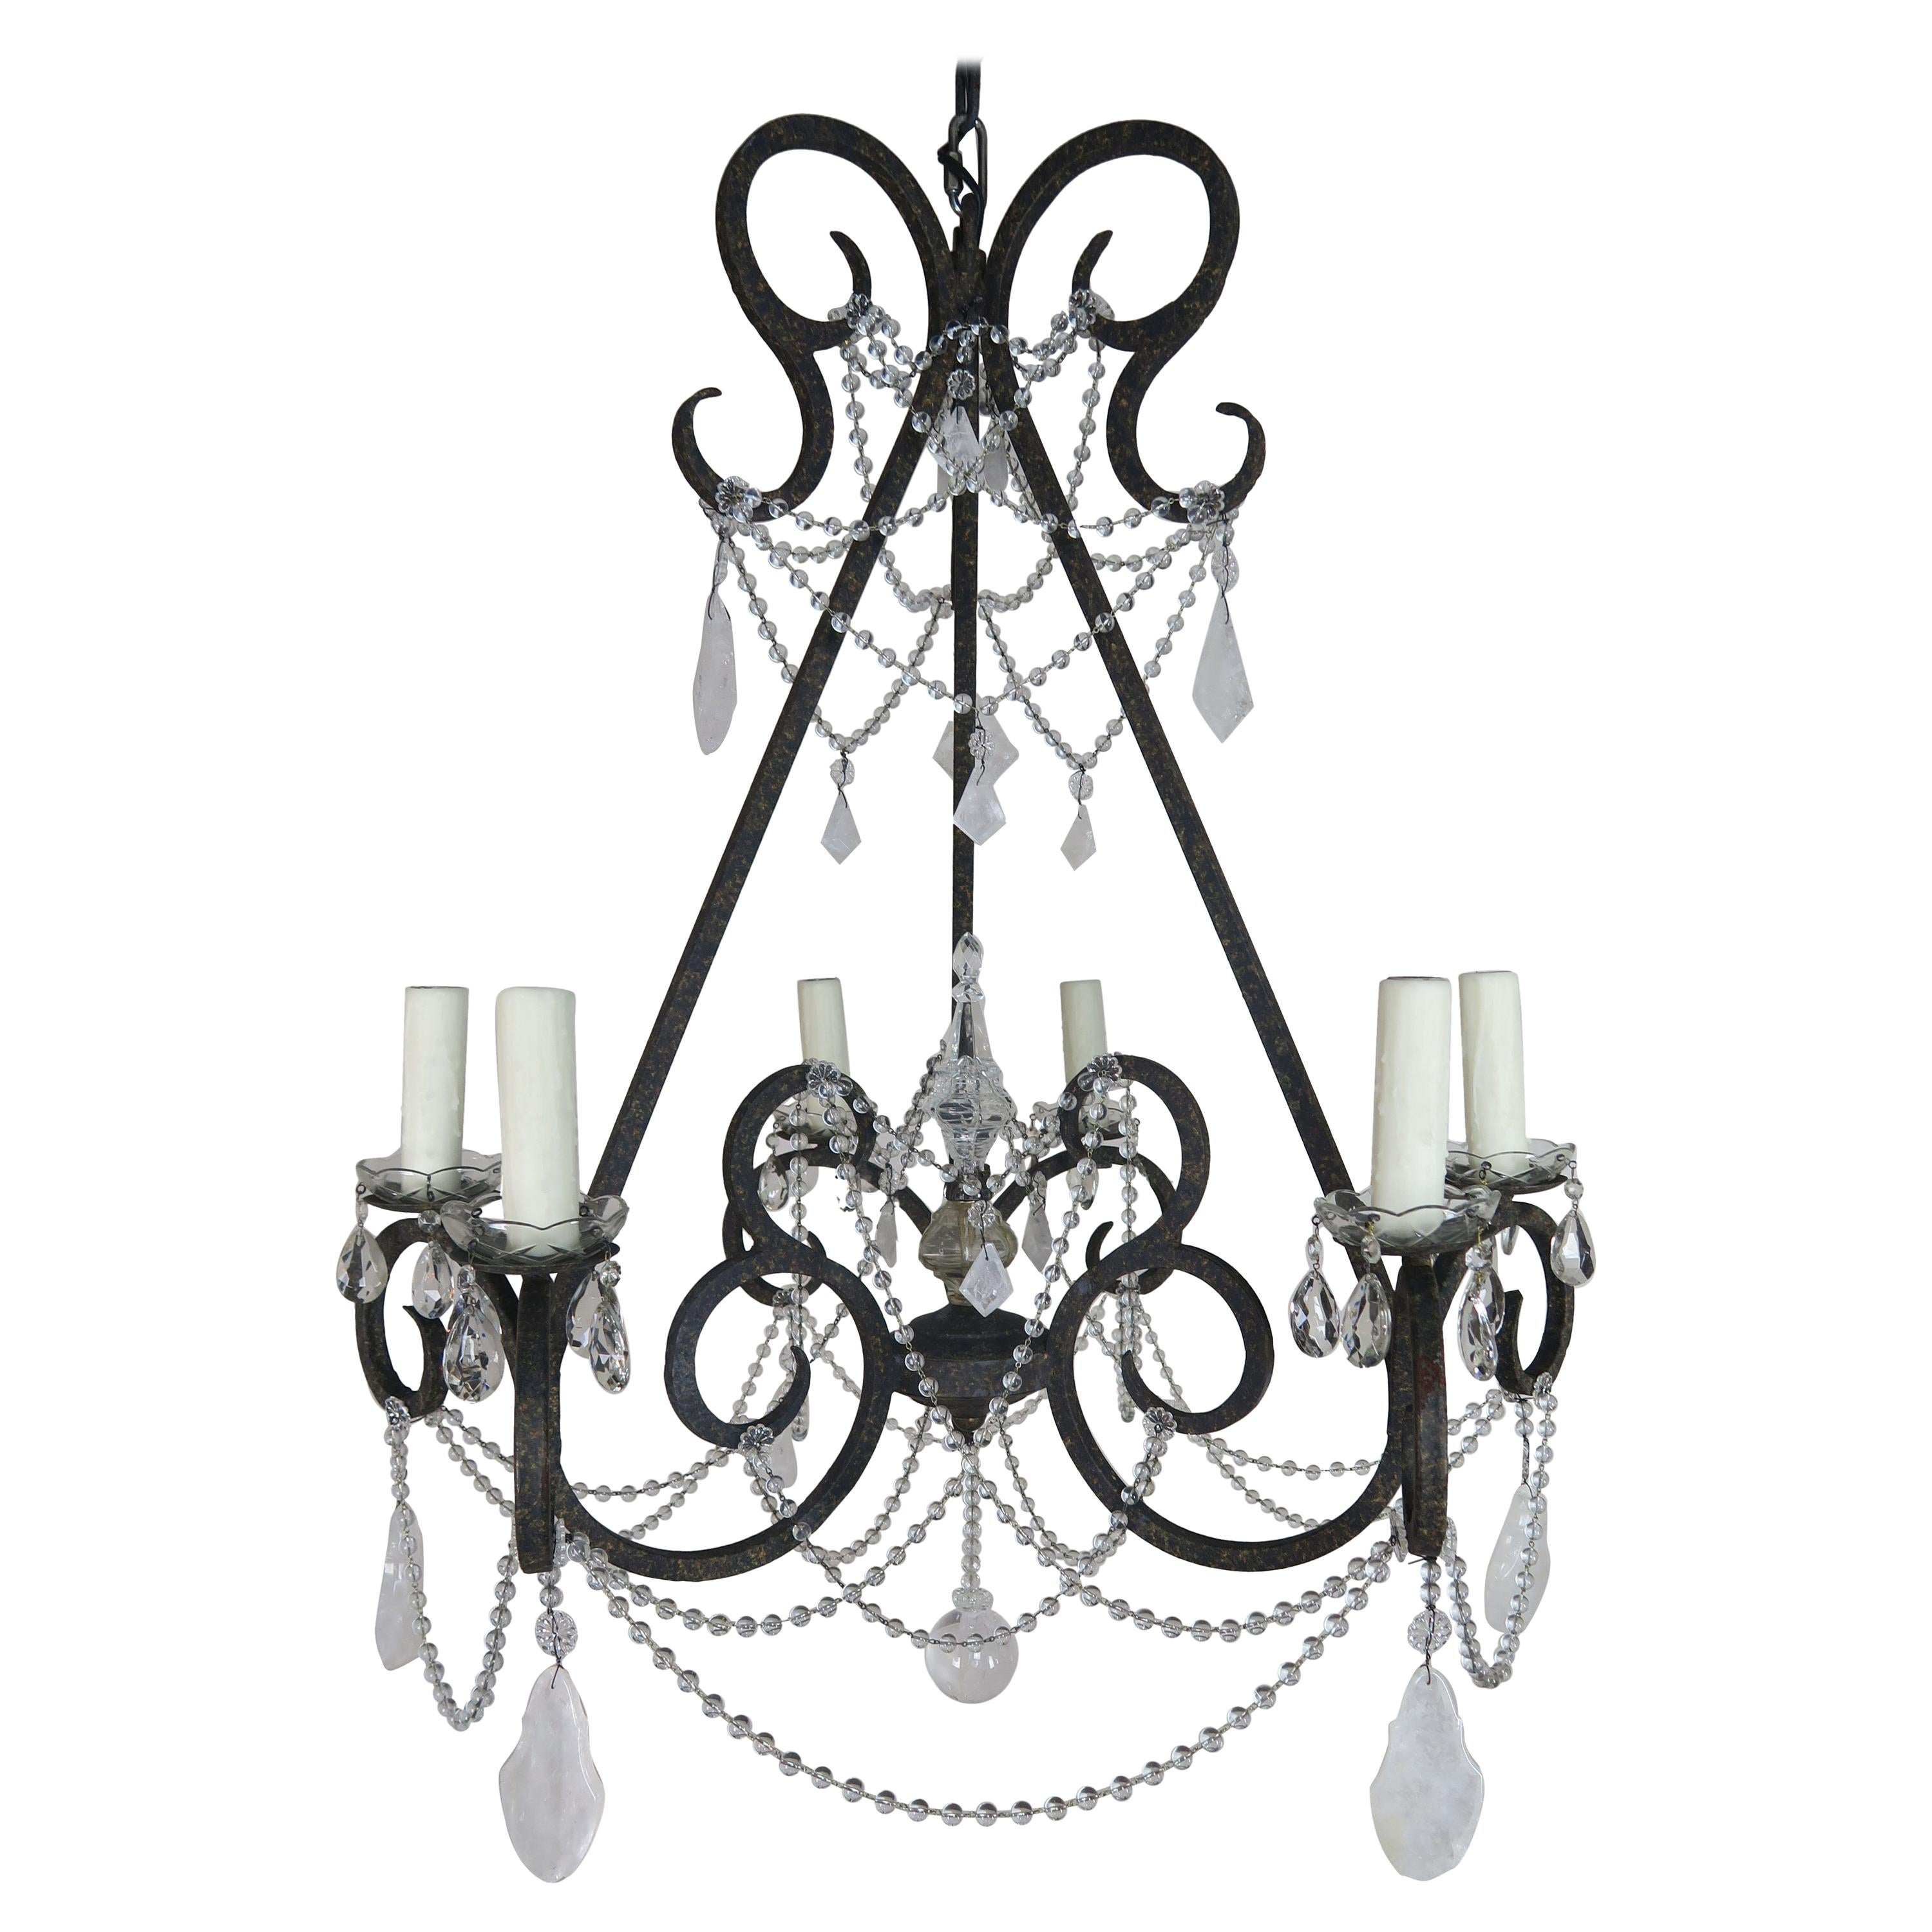 Six-Light Rock Crystal Wrought Iron Chandelier For Sale